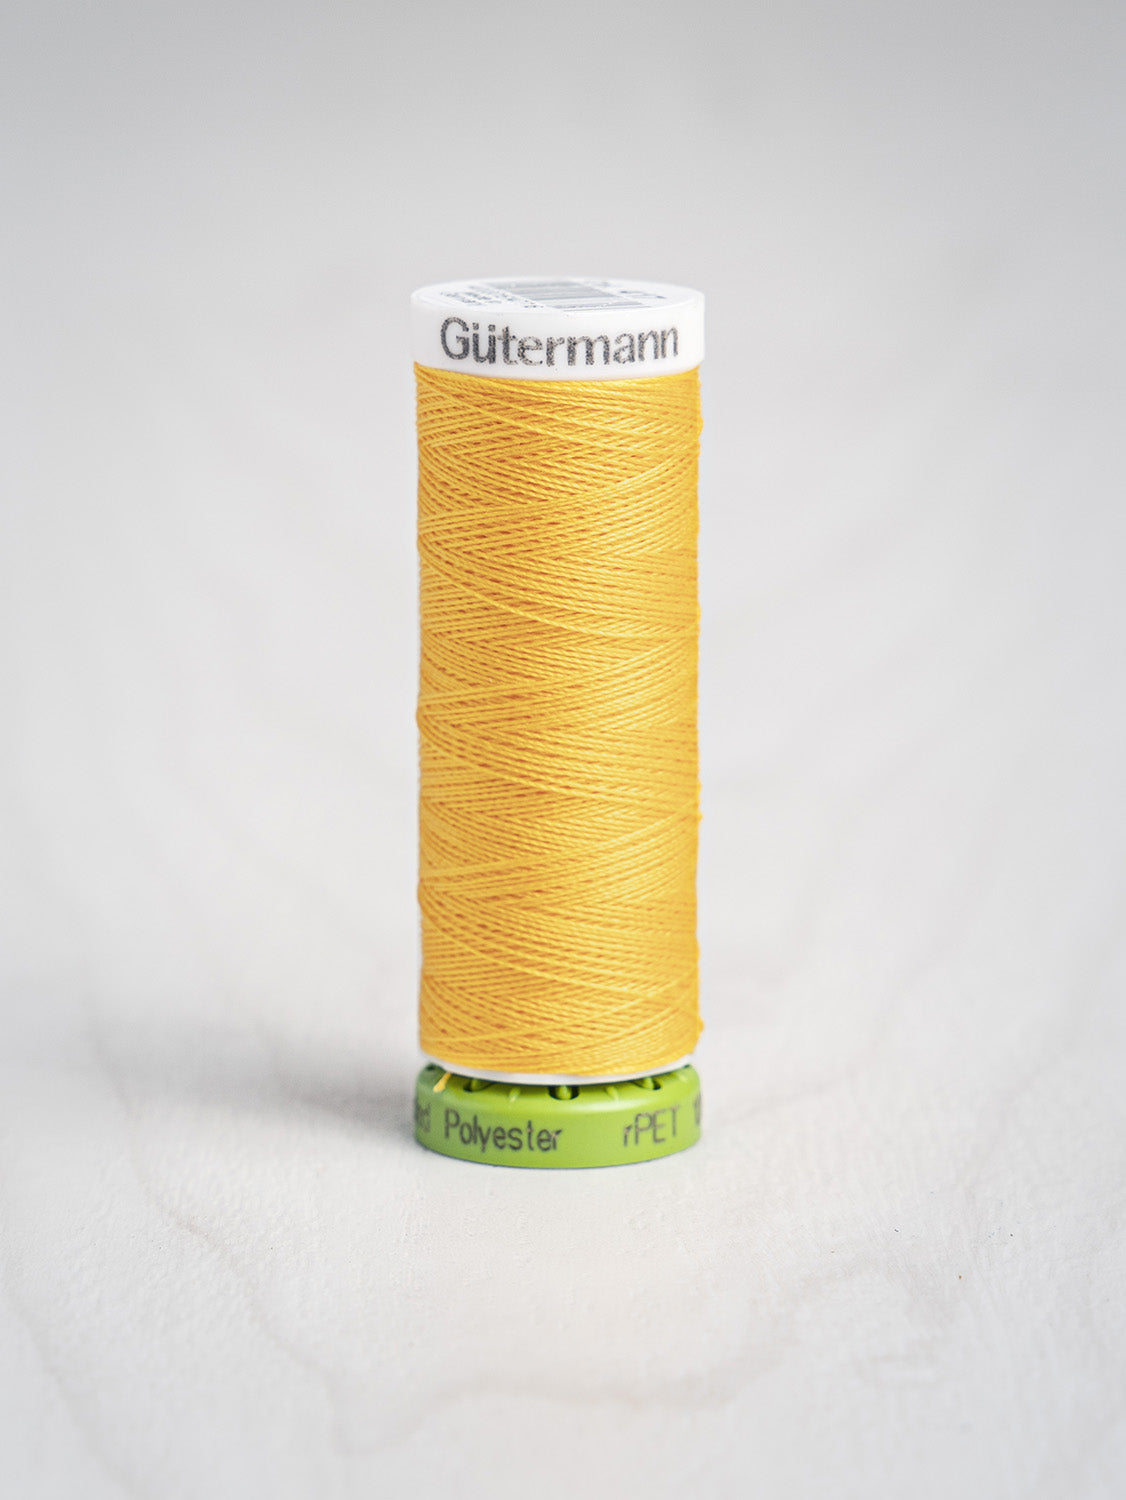 Gütermann All Purpose rPET Recycled Thread - Yellow 417